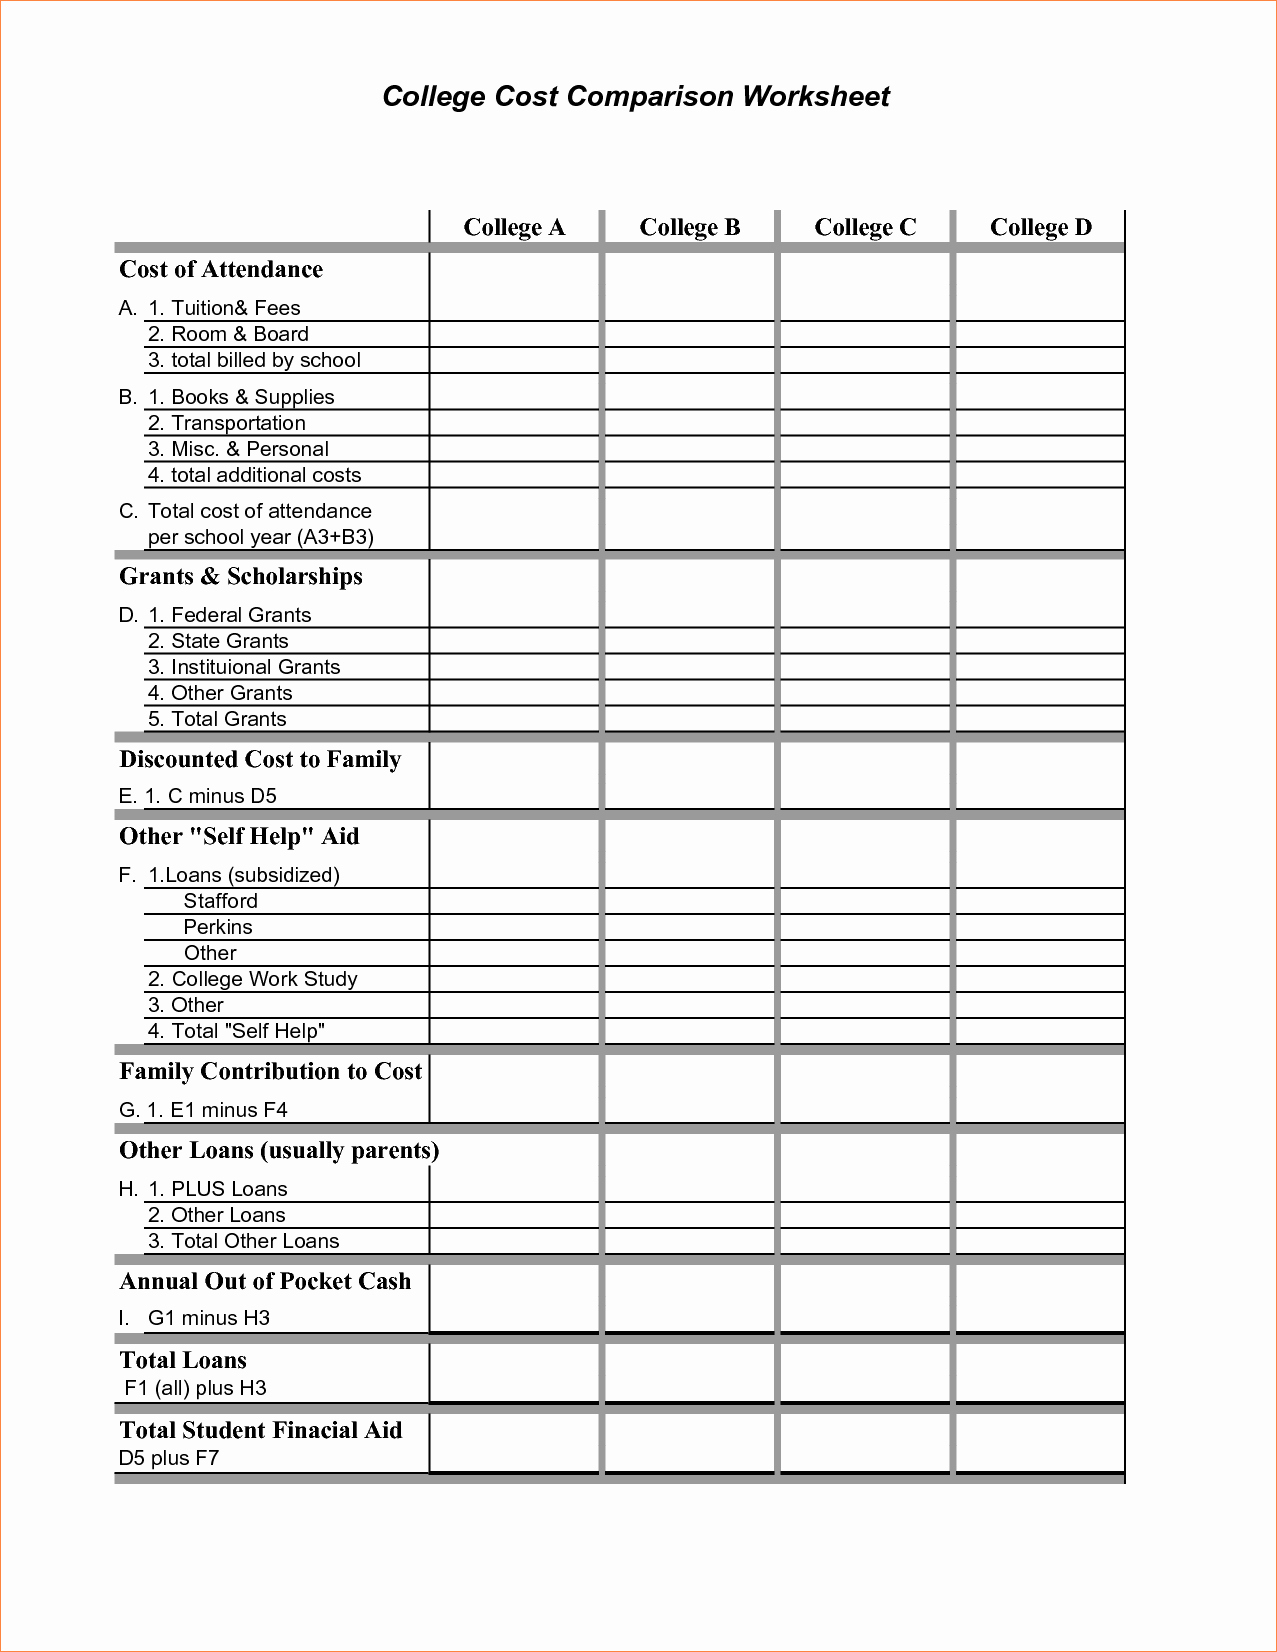 College Comparison Spreadsheet Intended For College Comparison Spreadsheet Templates Excel Cost Sample